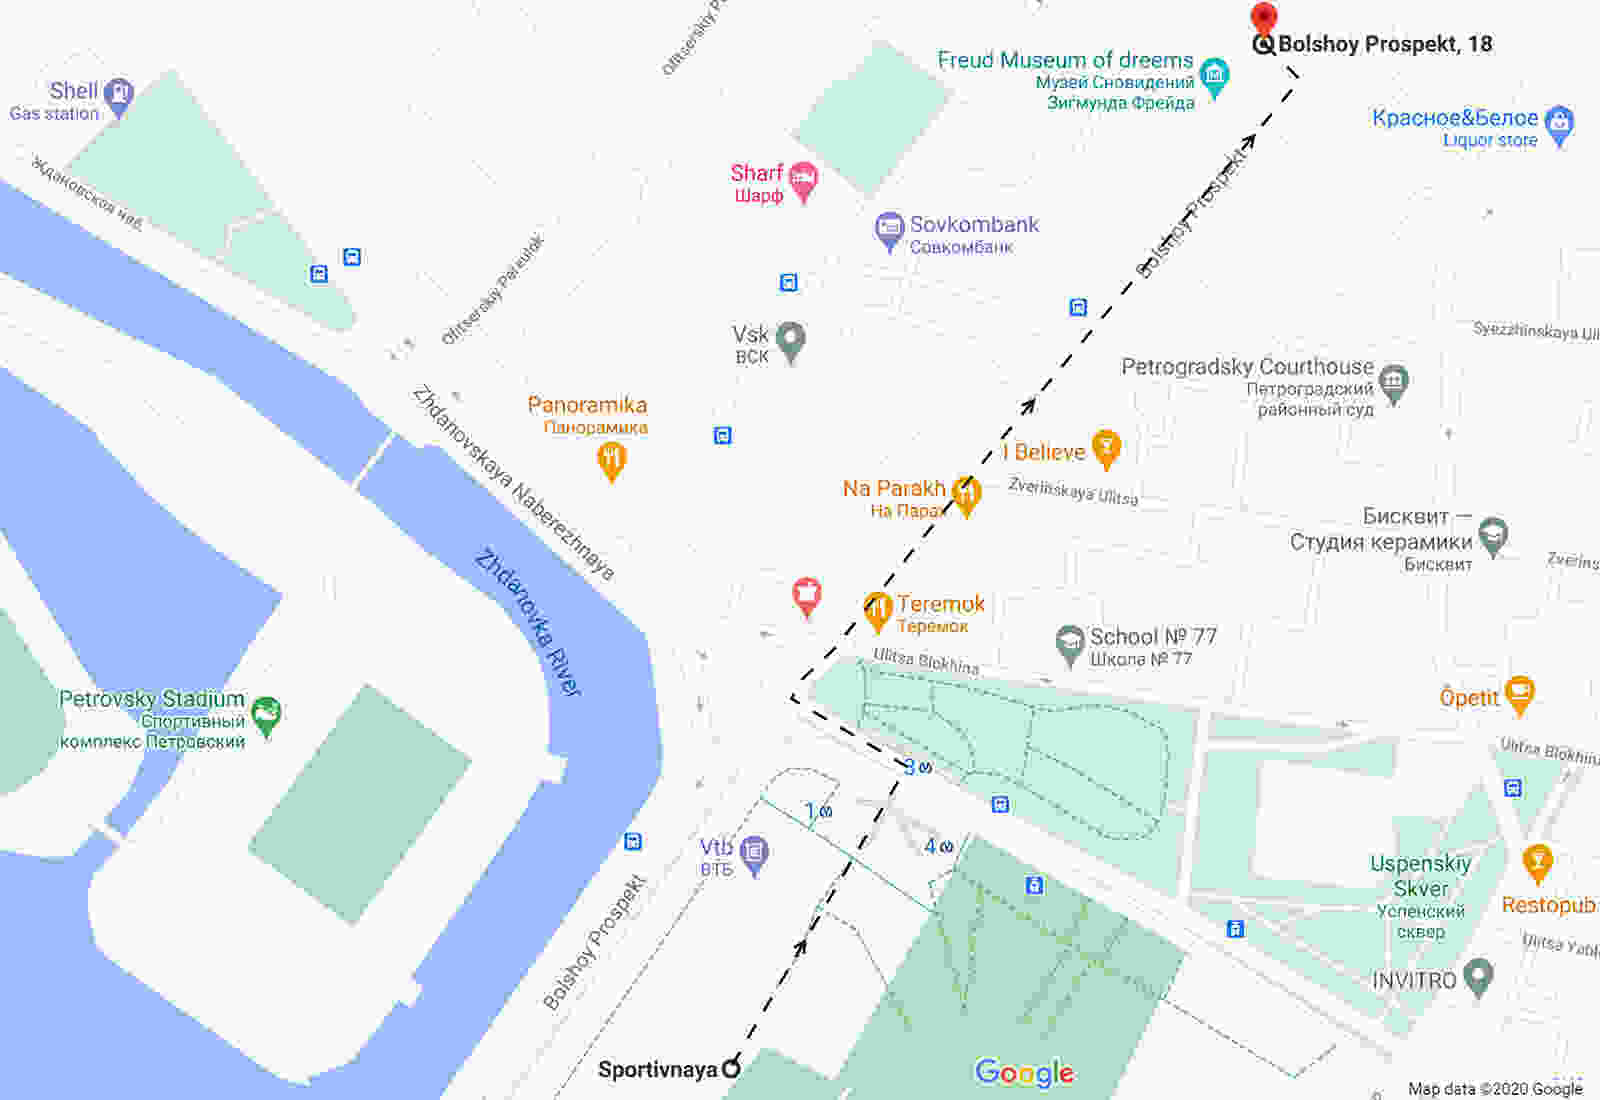 Directions to the UNIGINE office in St. Petersburg